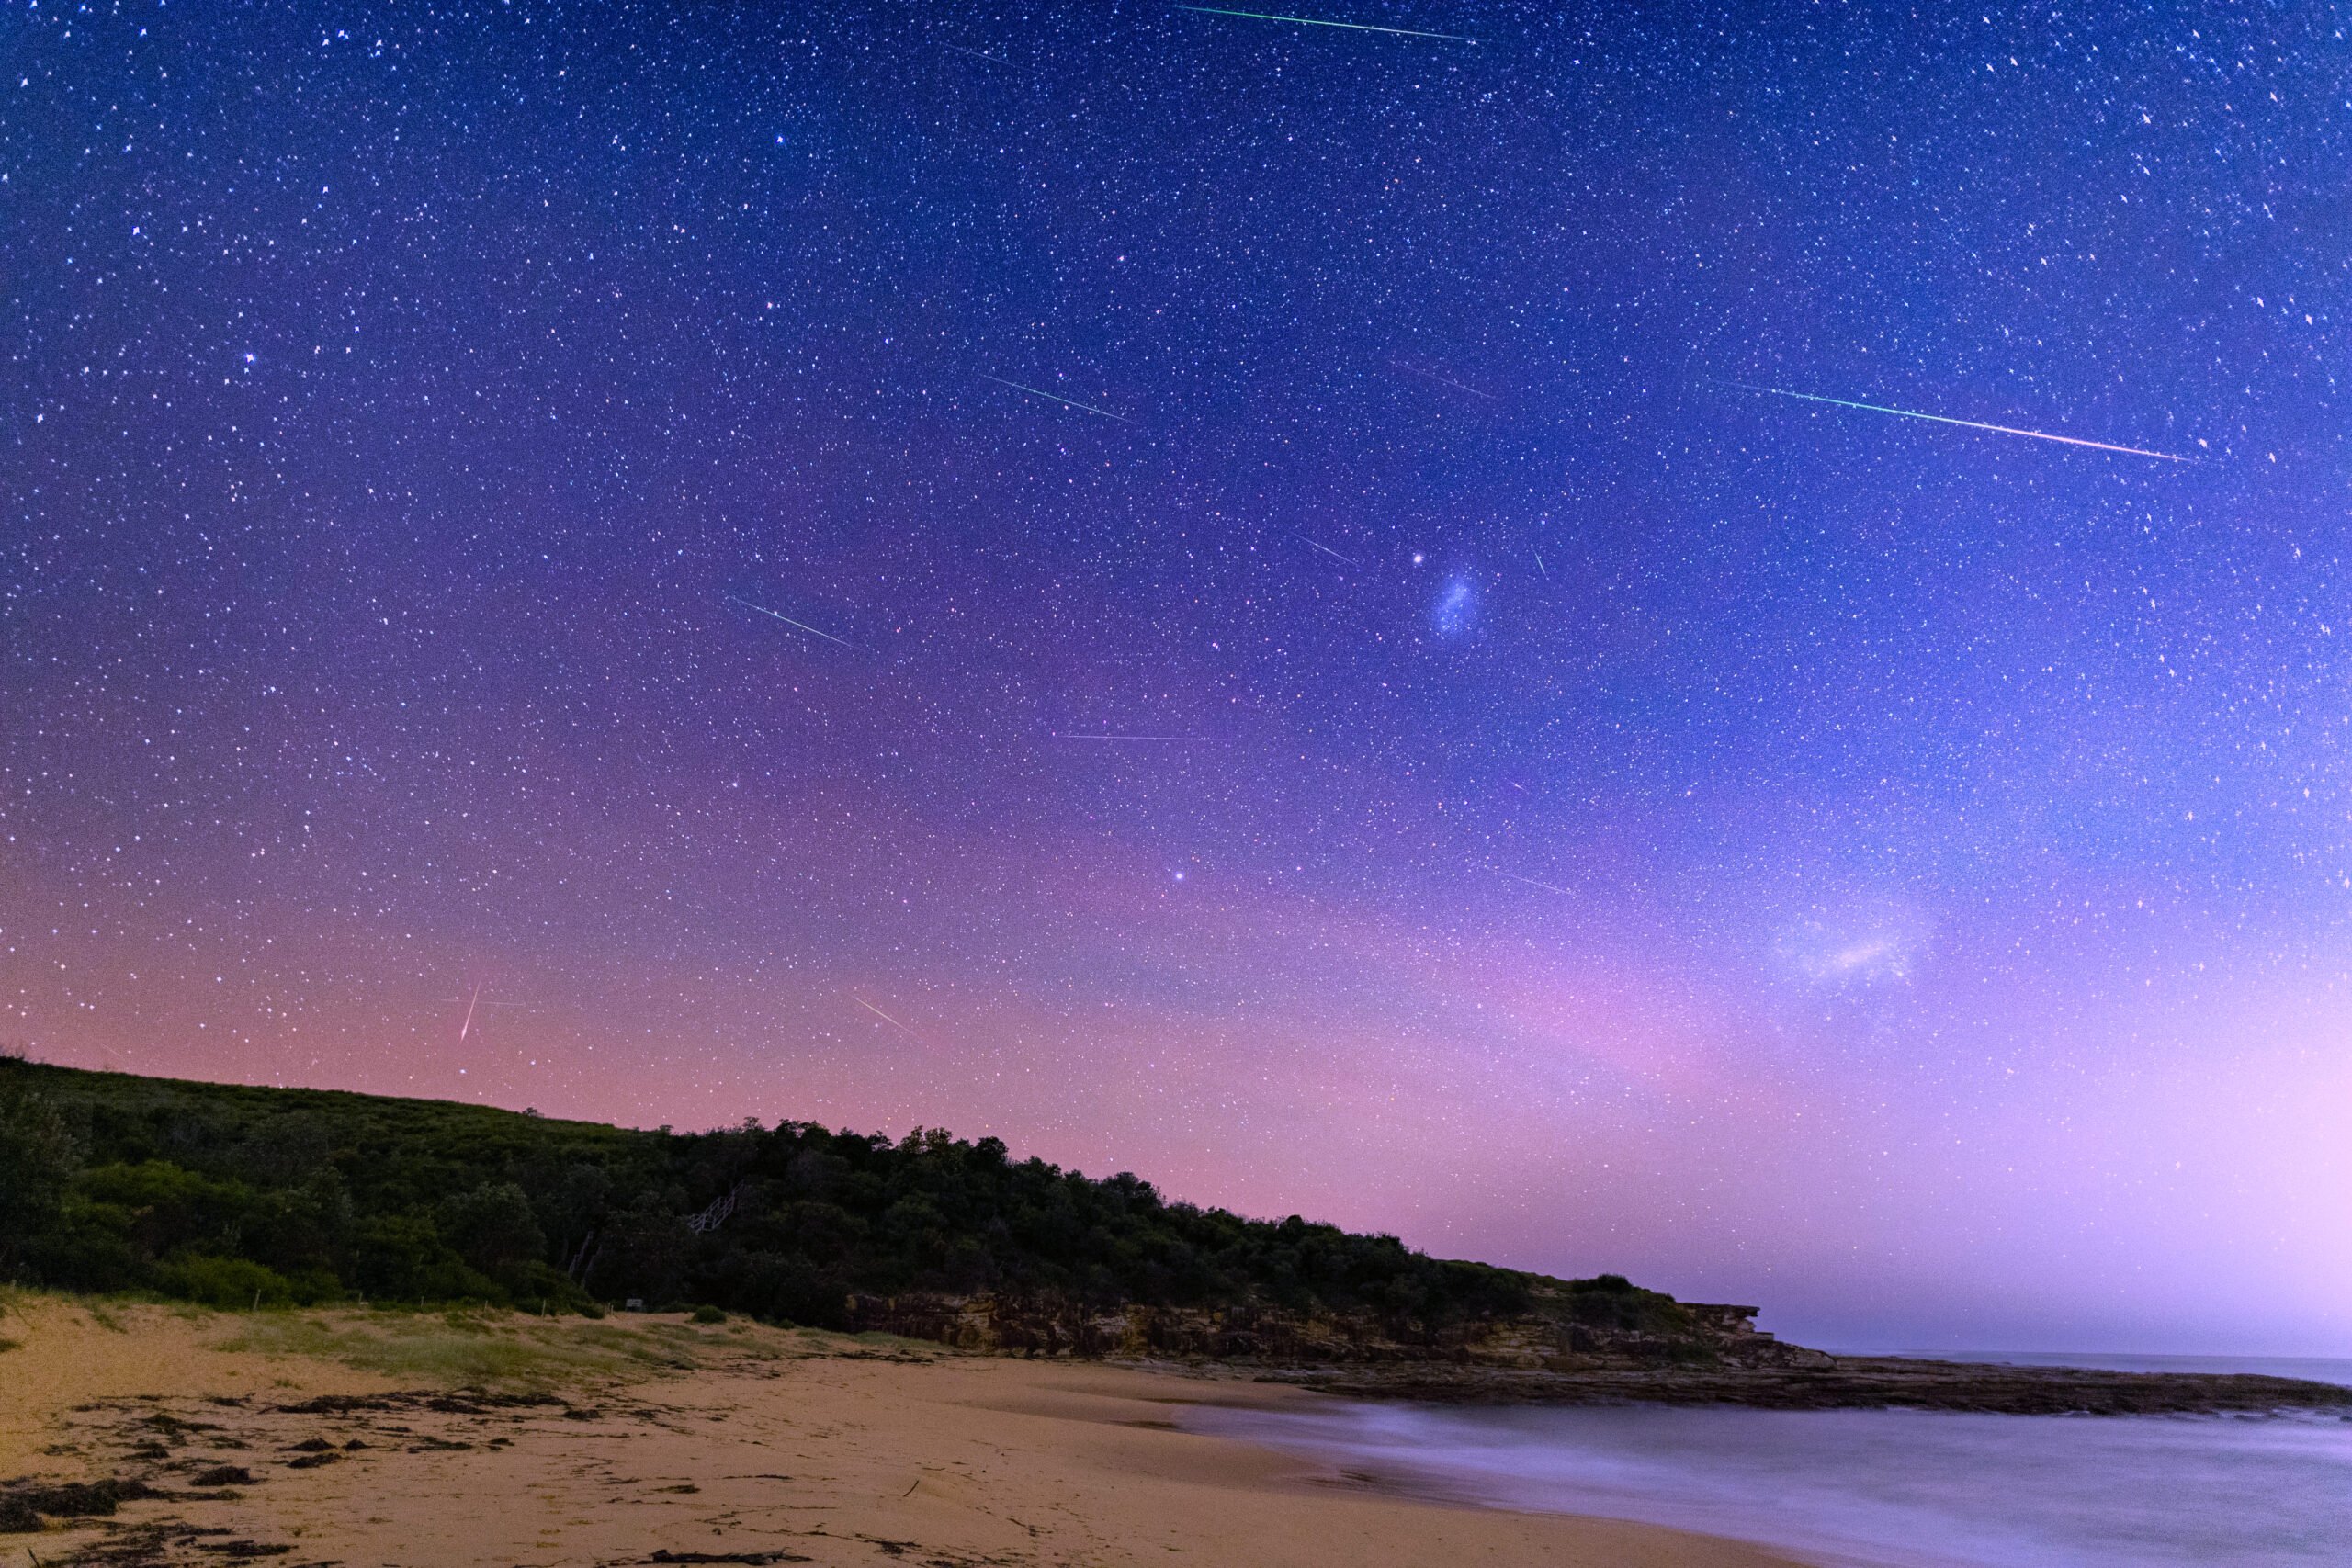 Image for article: How to see the Eta Aquariid meteor shower from Australia